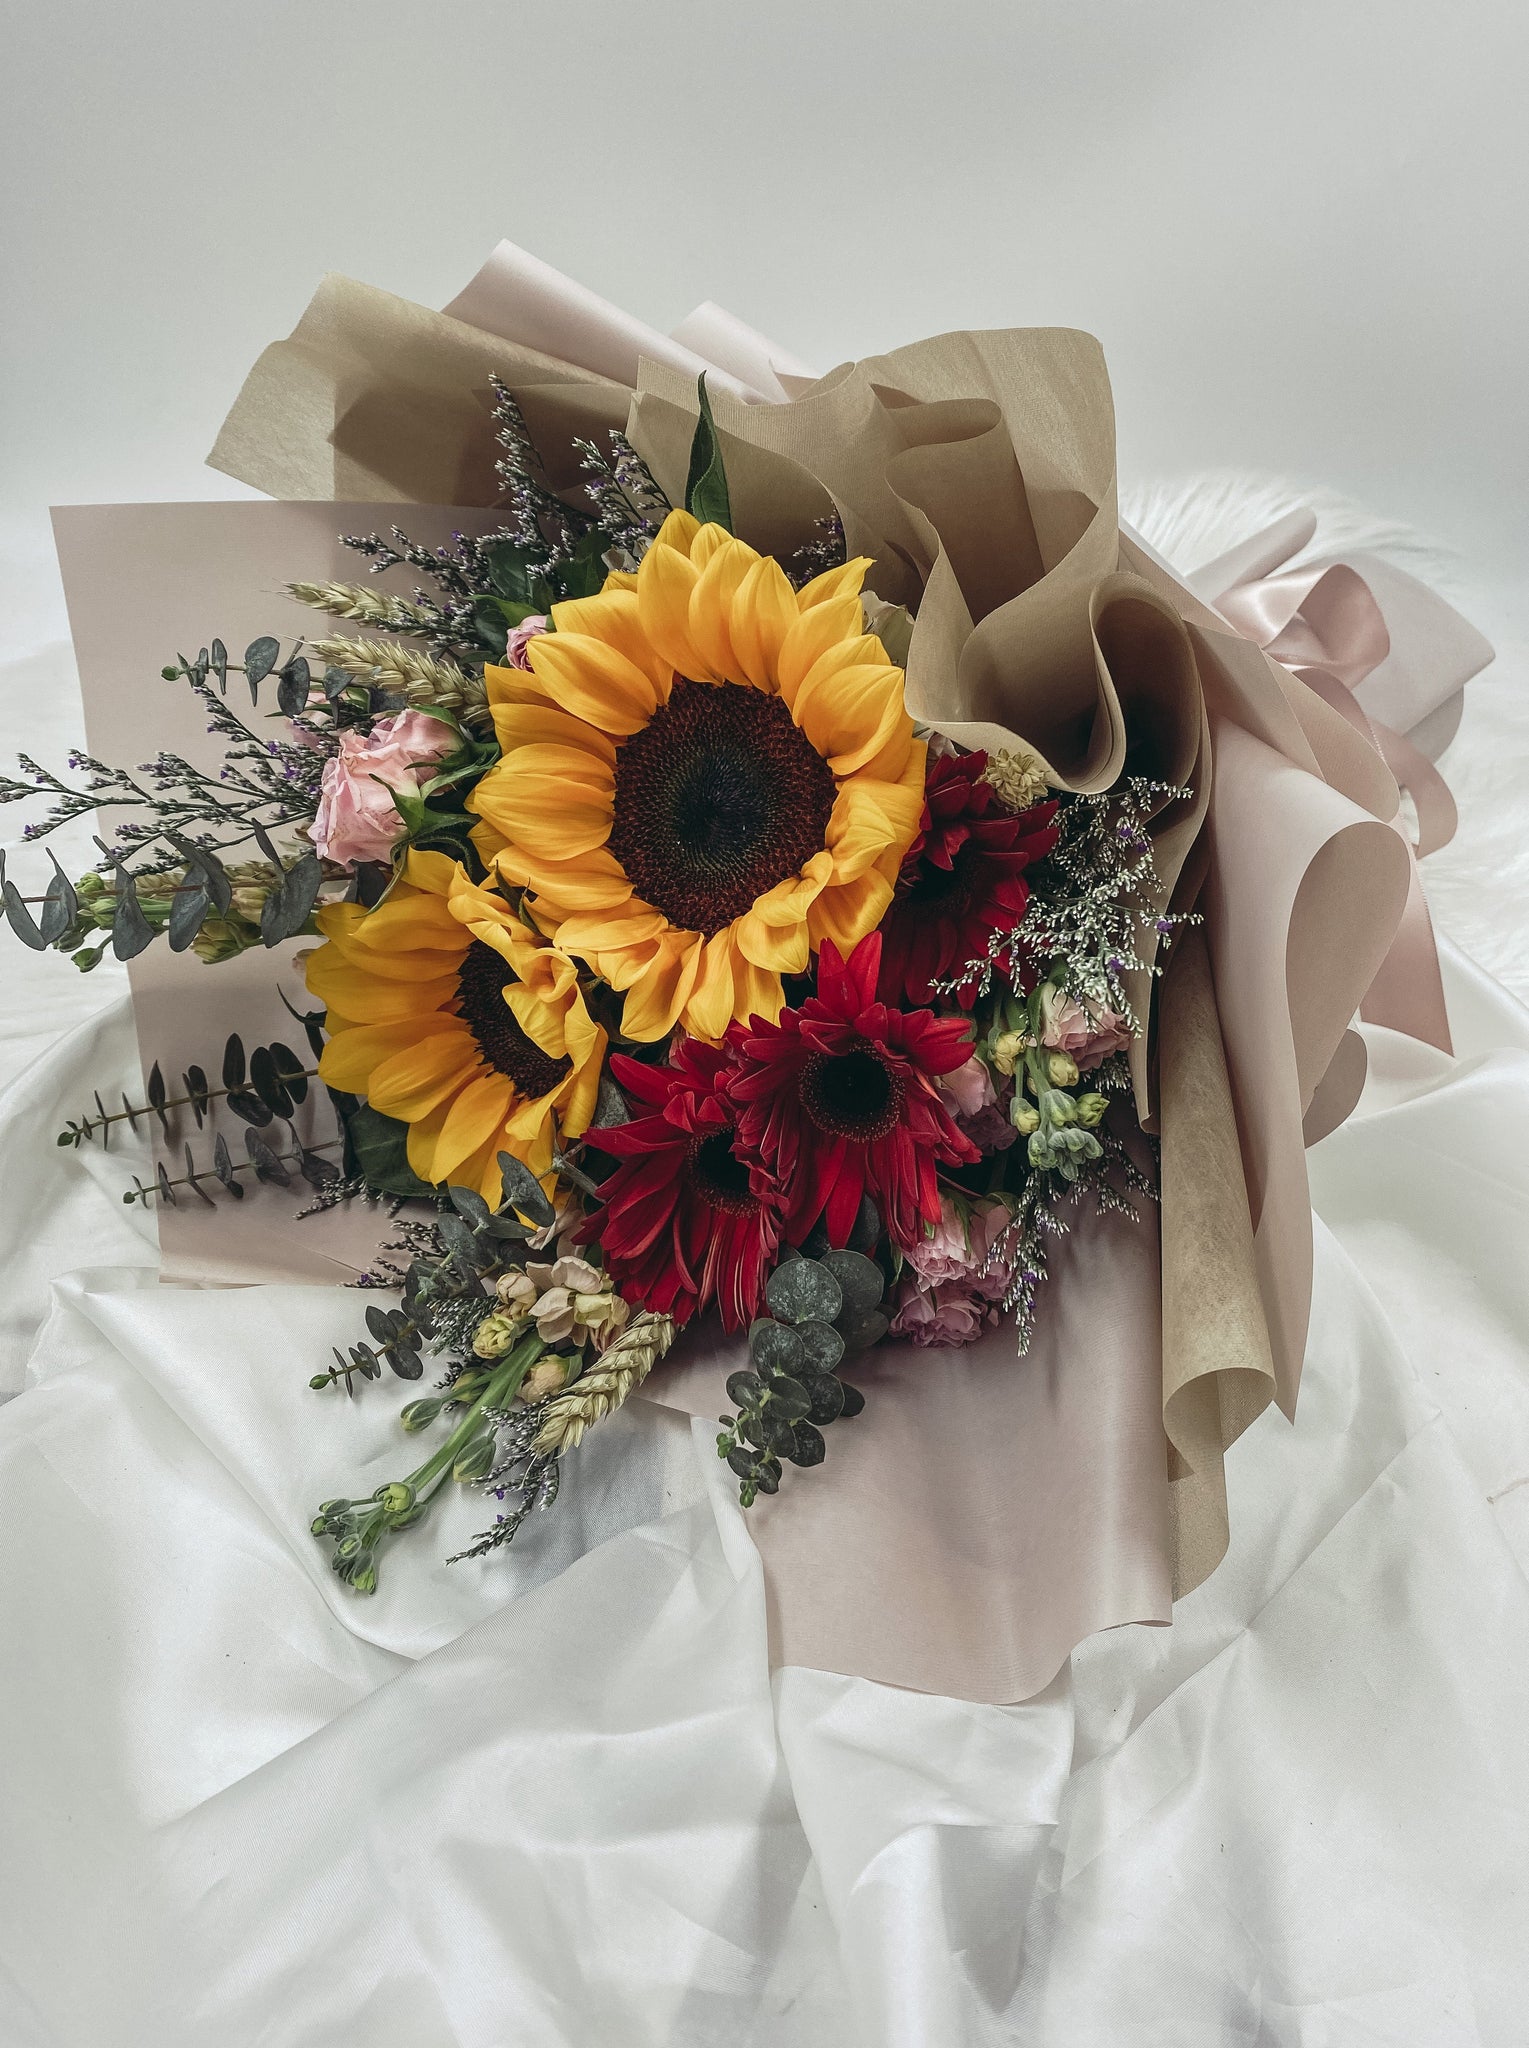 sunflower gerbera Cheap Flower Delivery Same day flower delivery available for orders placed before 2pm. Free delivery above $60